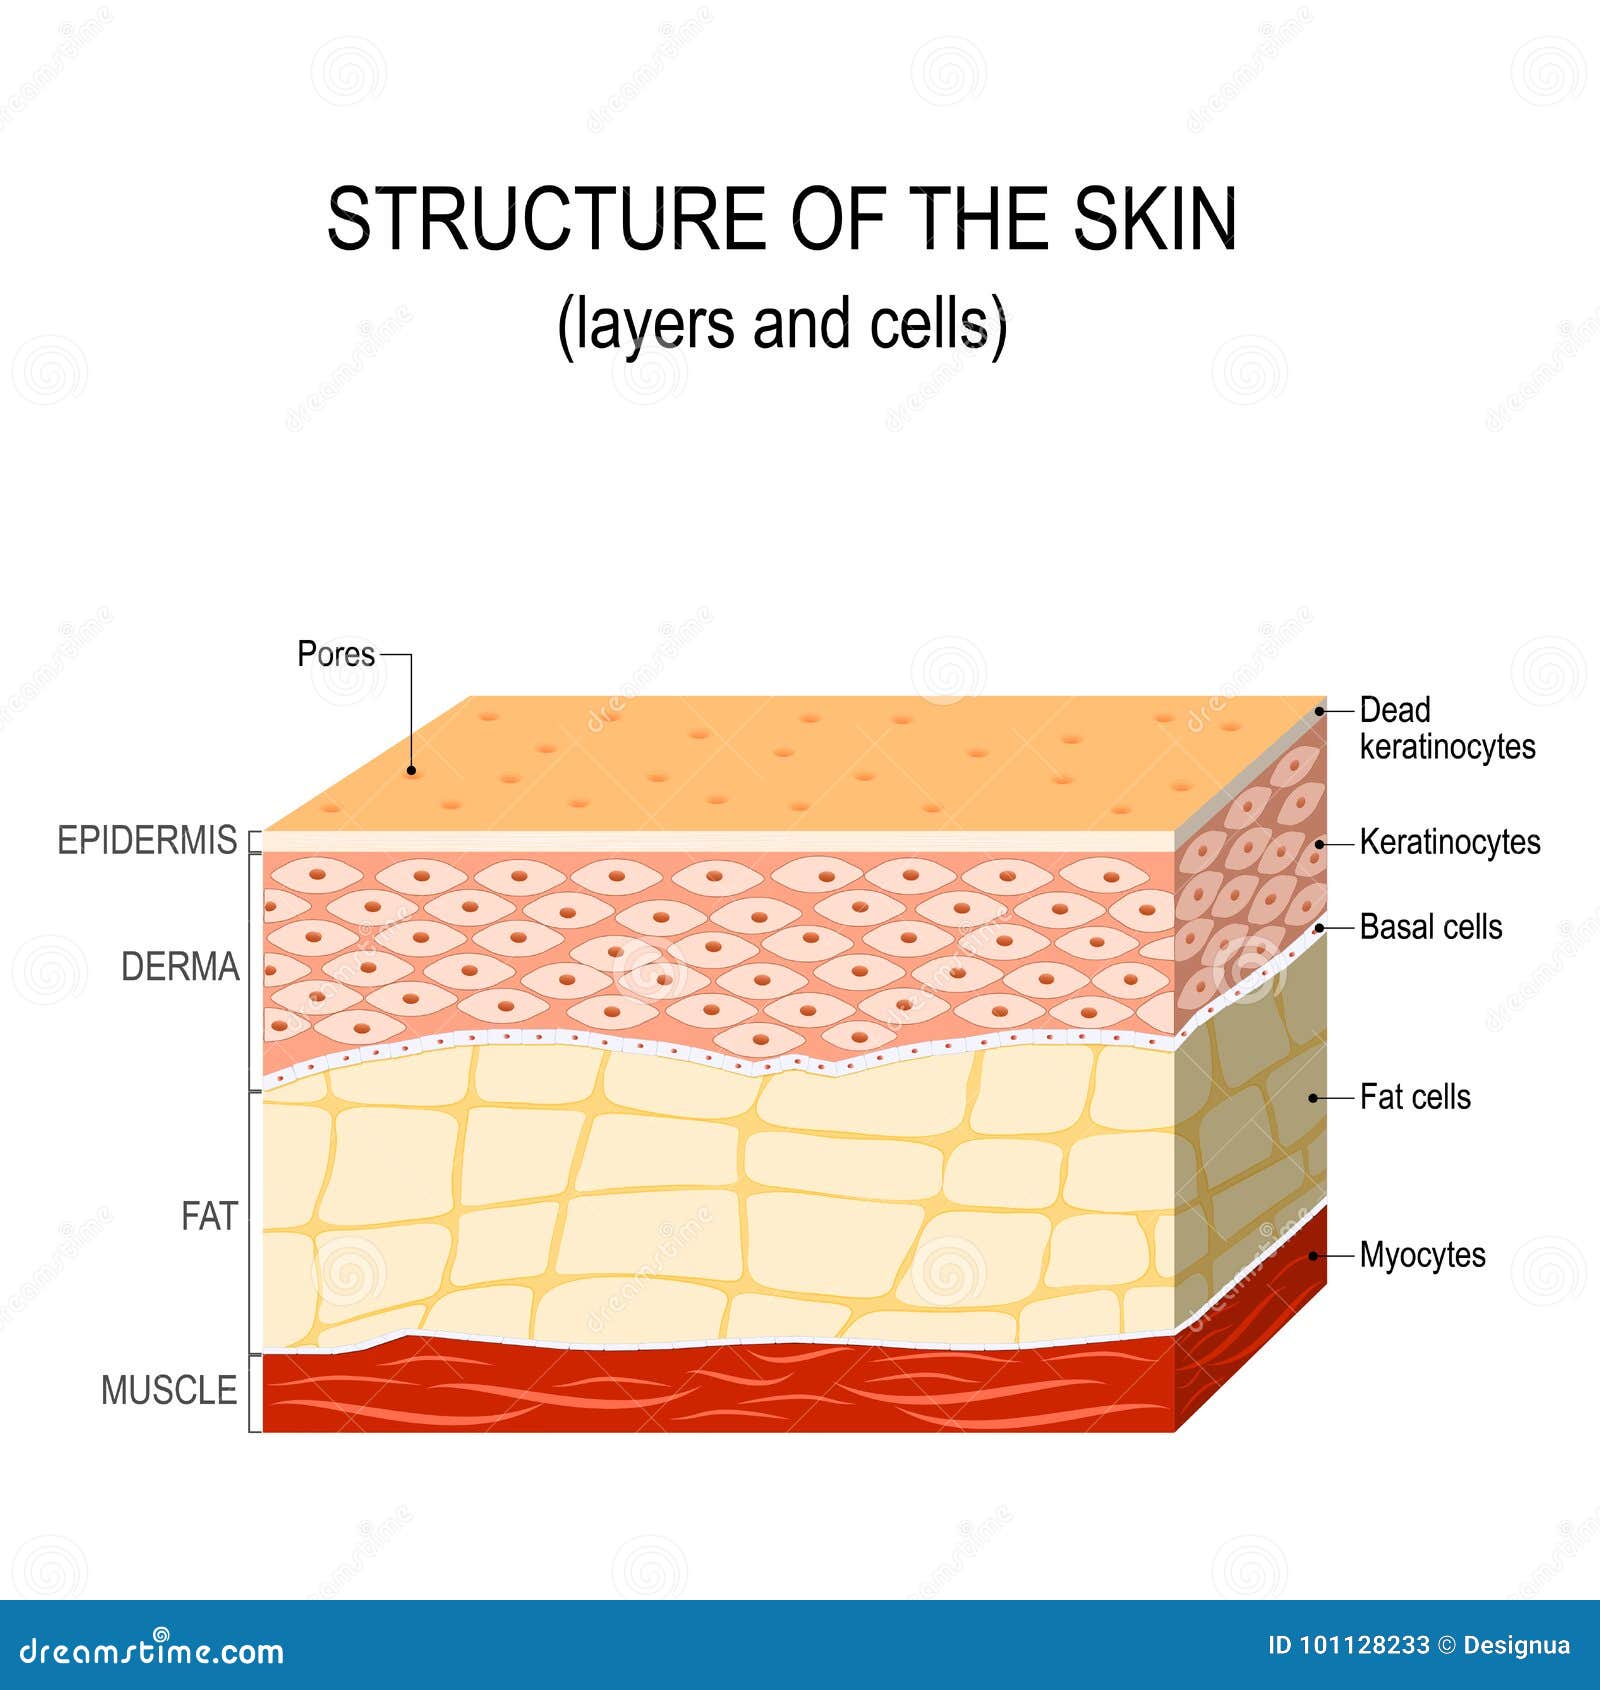 human skin is an example of a